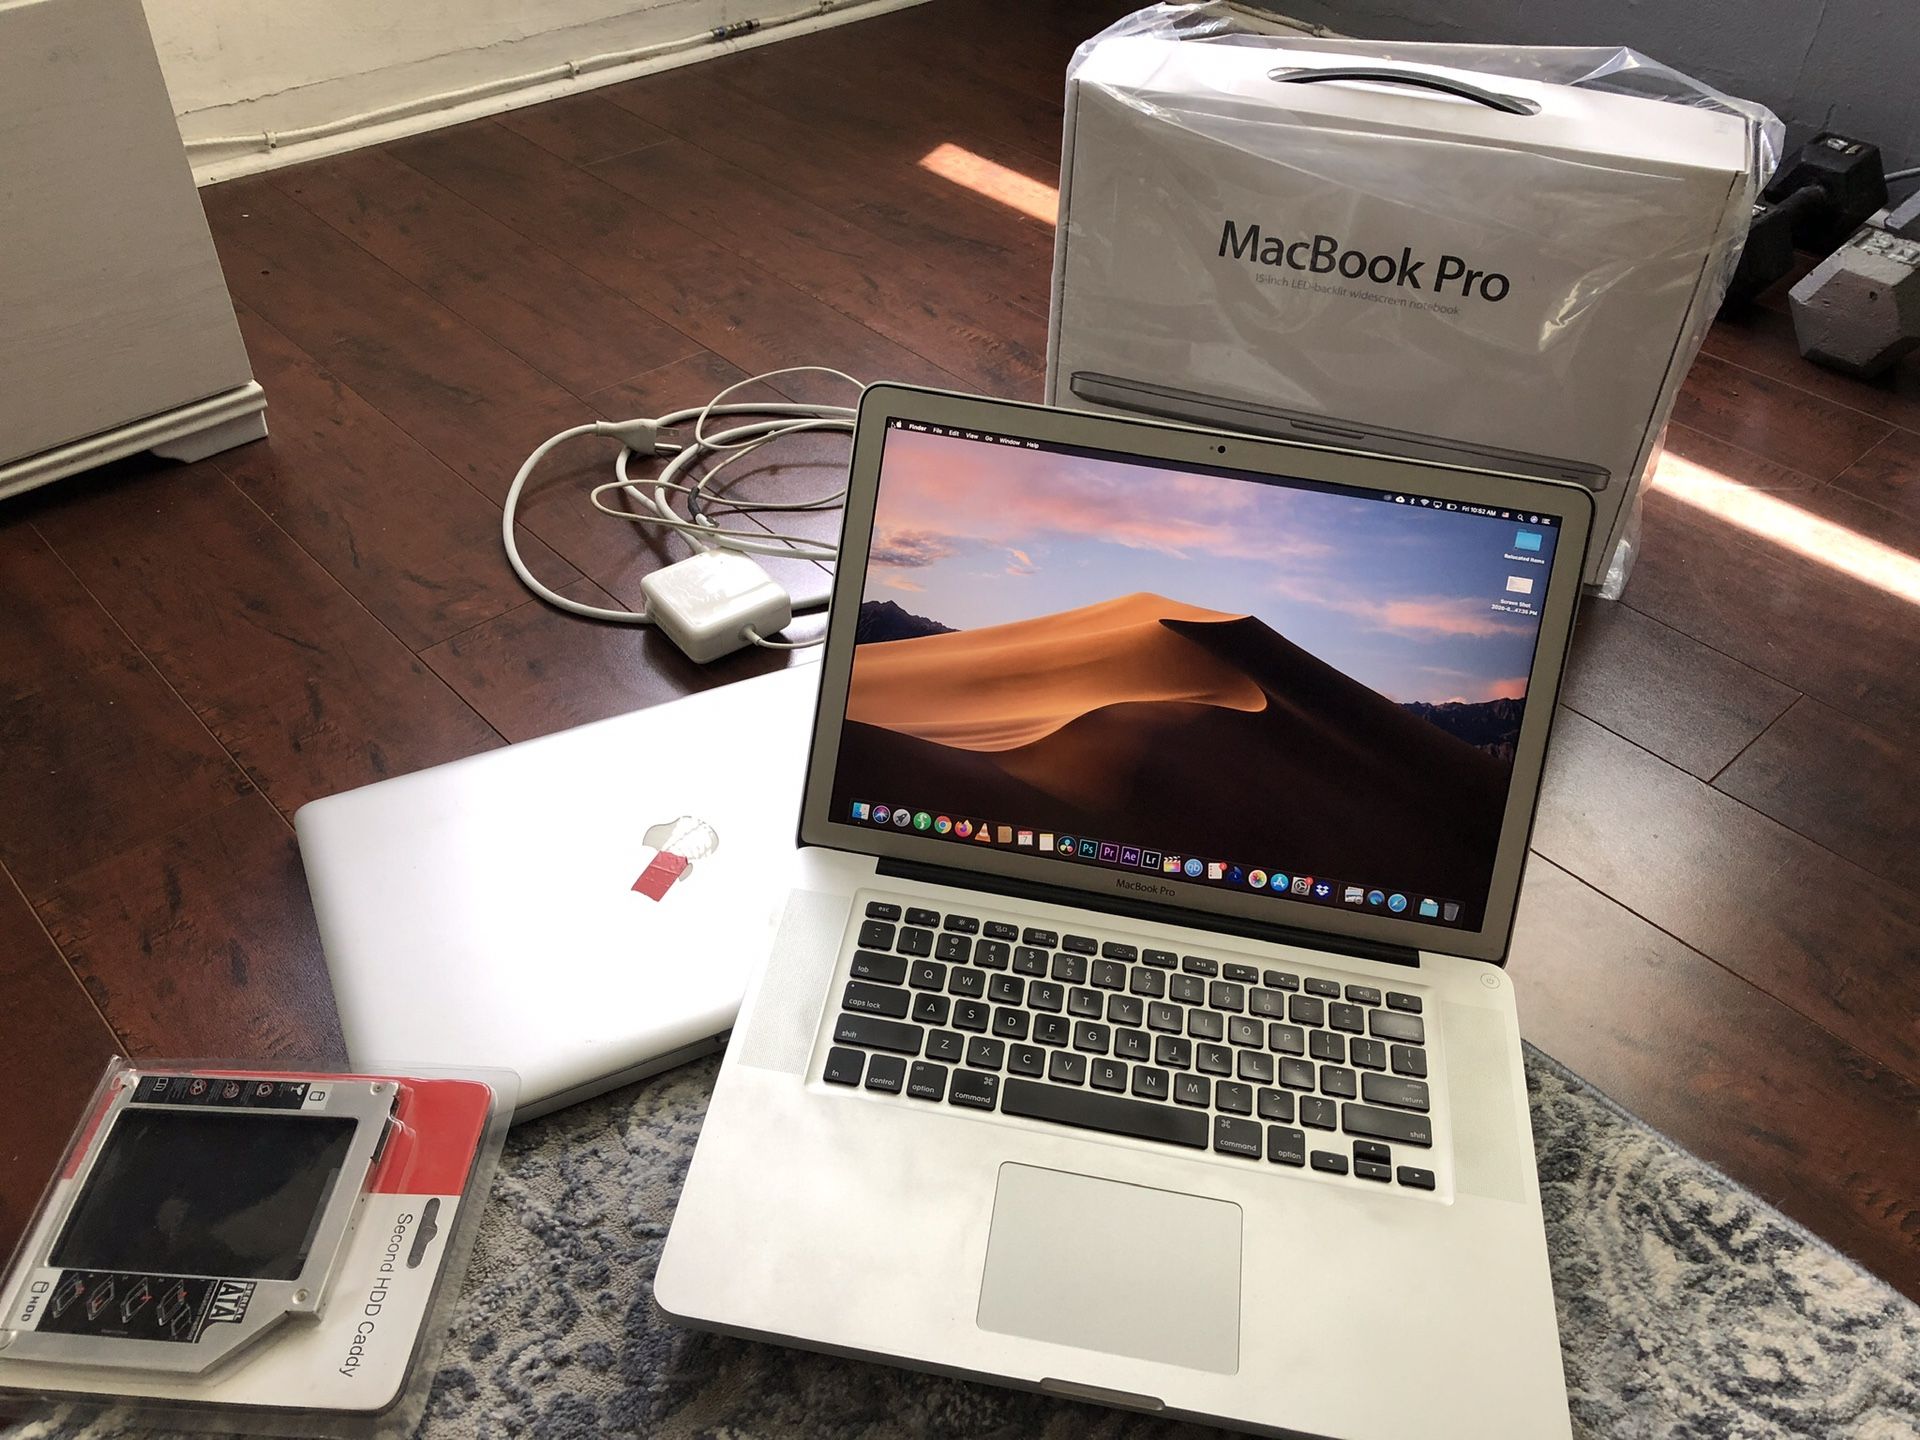 Mid 2012 Apple Mac book pro 16gigs ram 1500mb graphics 256ssd SuperDrive and extra mbp